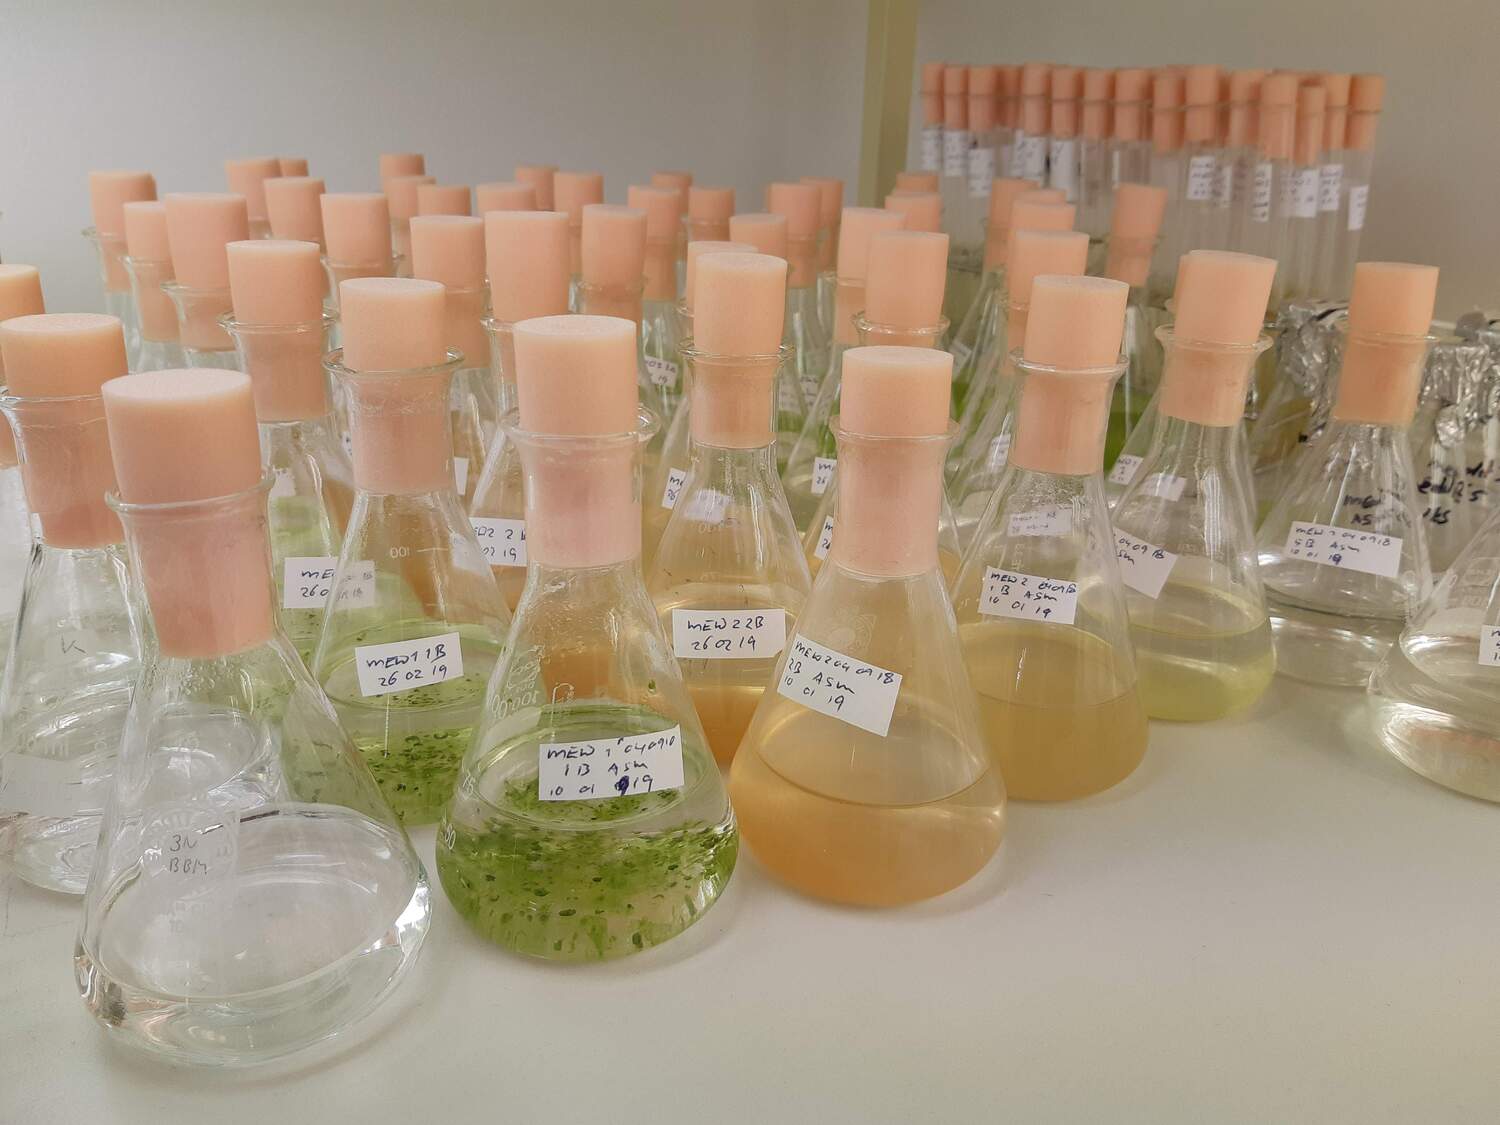 Algae cultures used for the study